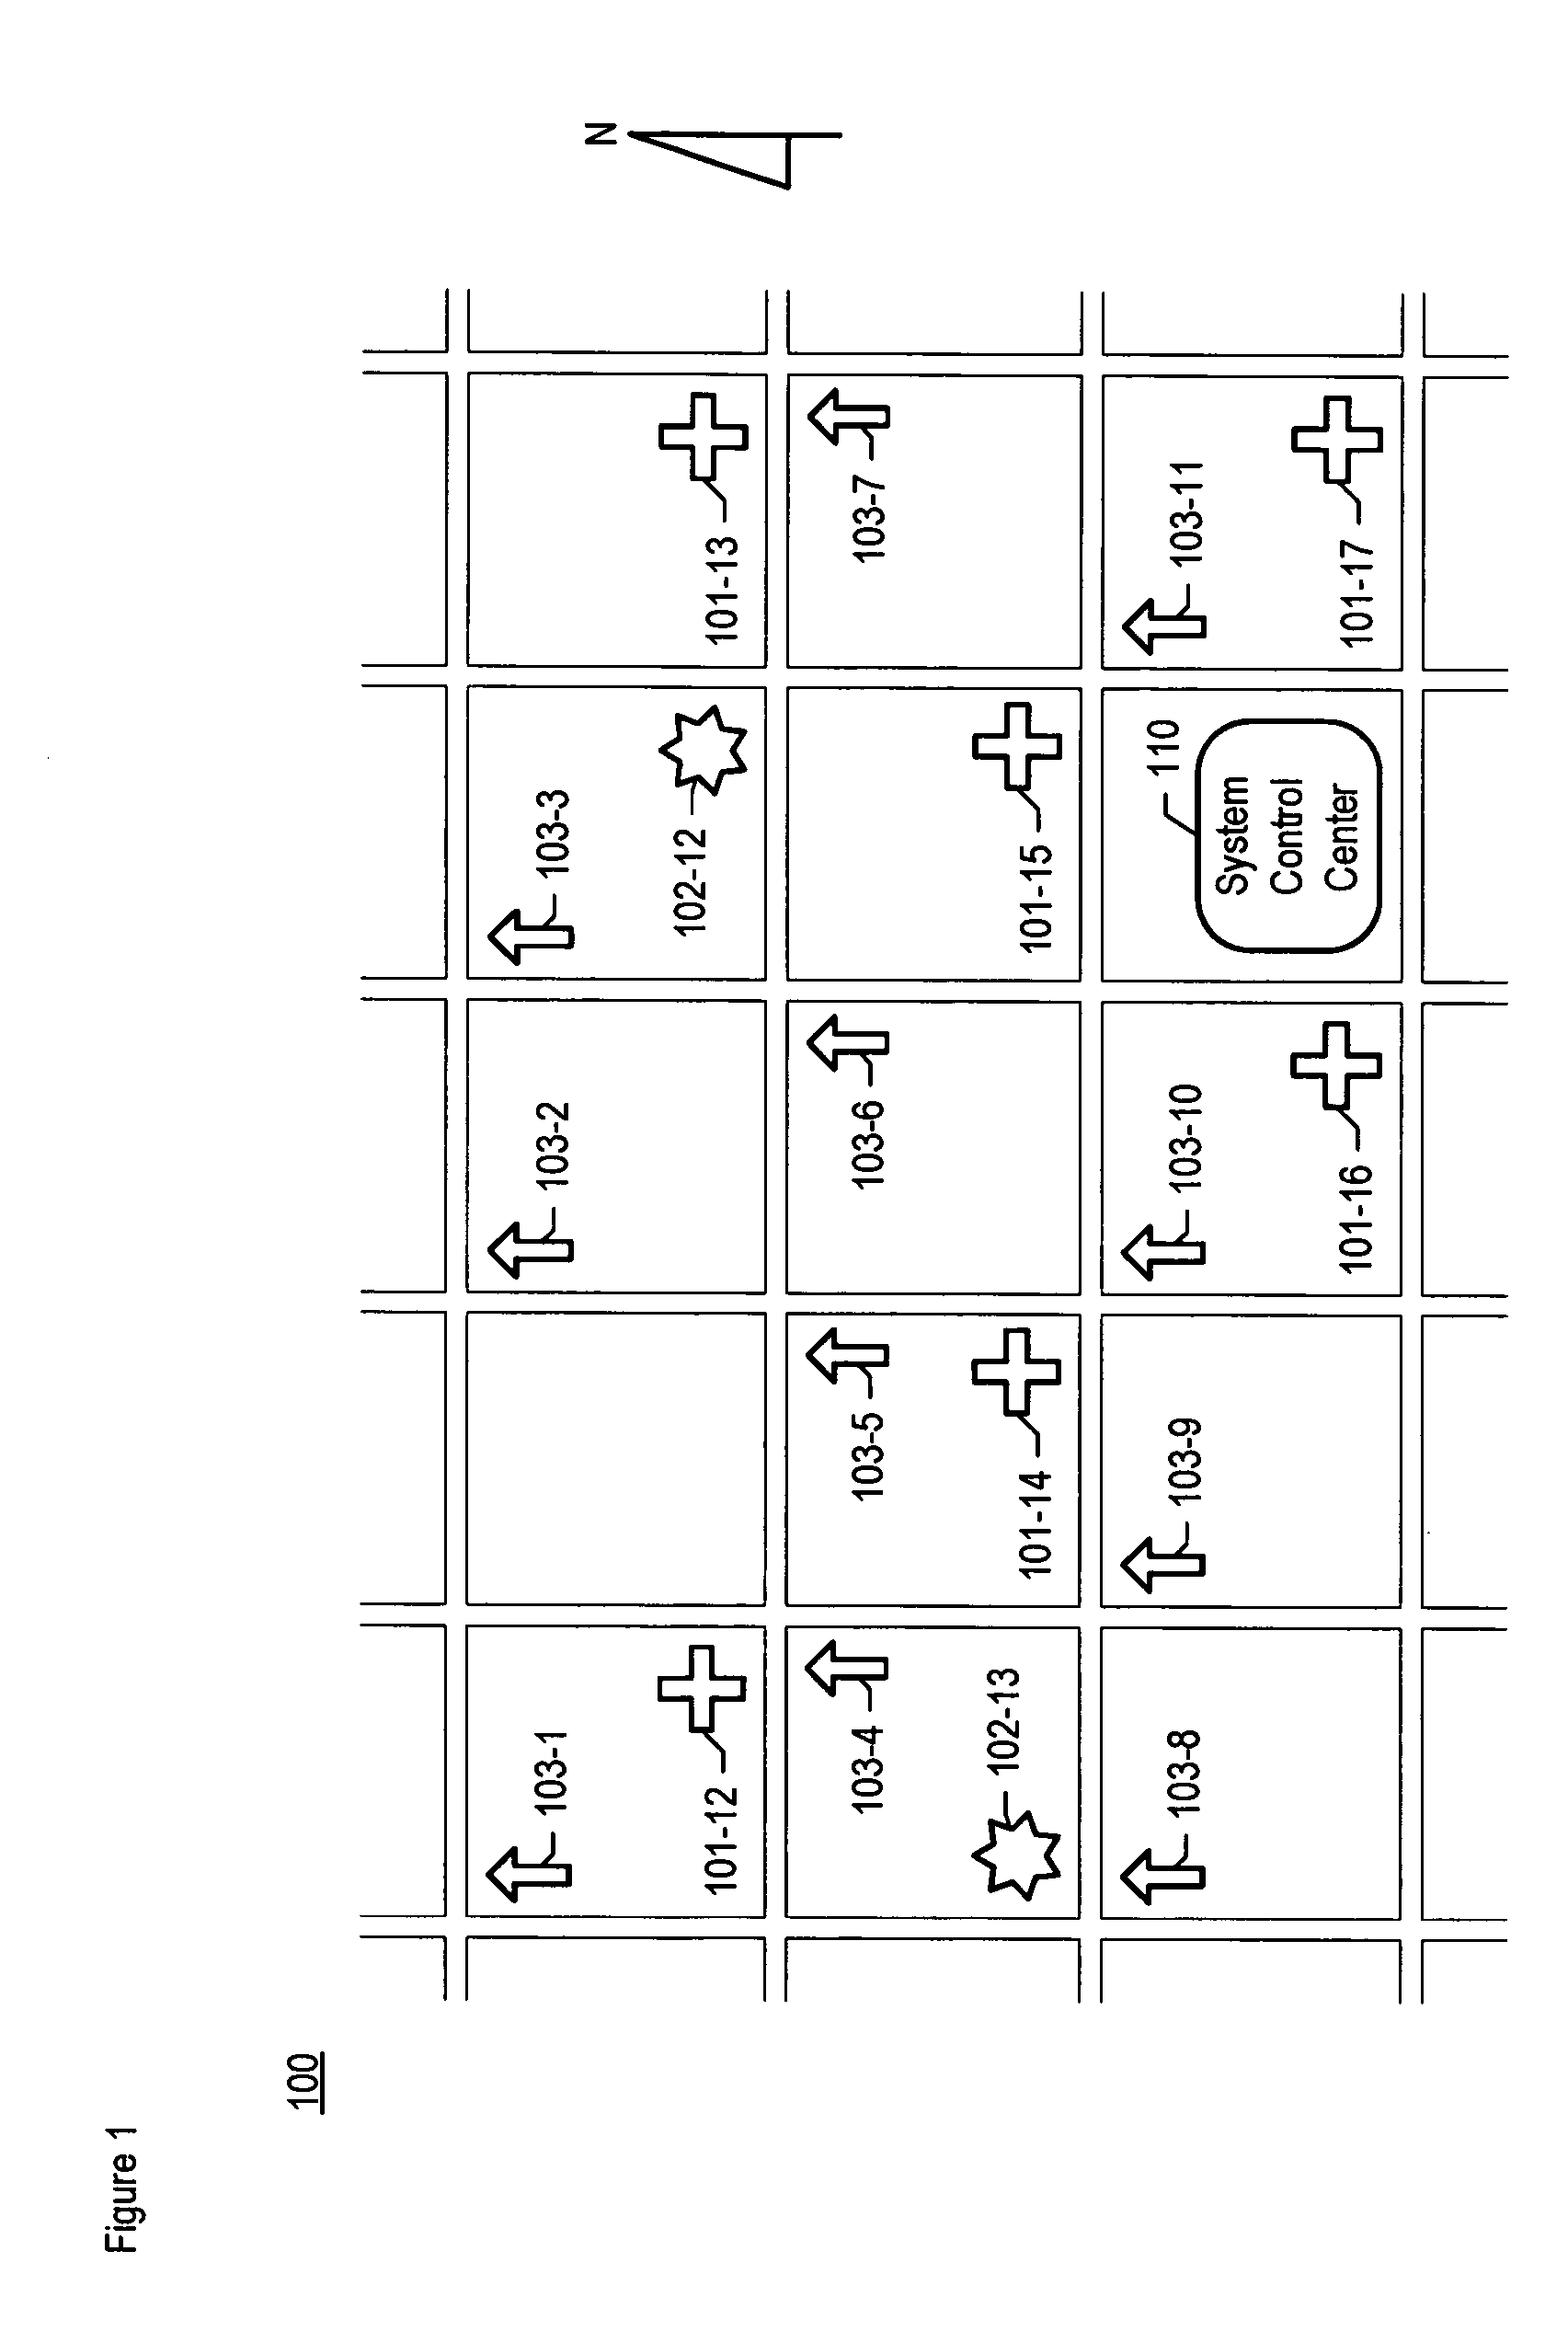 Chemical, biological, radiological, and nuclear weapon detection system comprising array of spatially-disparate sensors